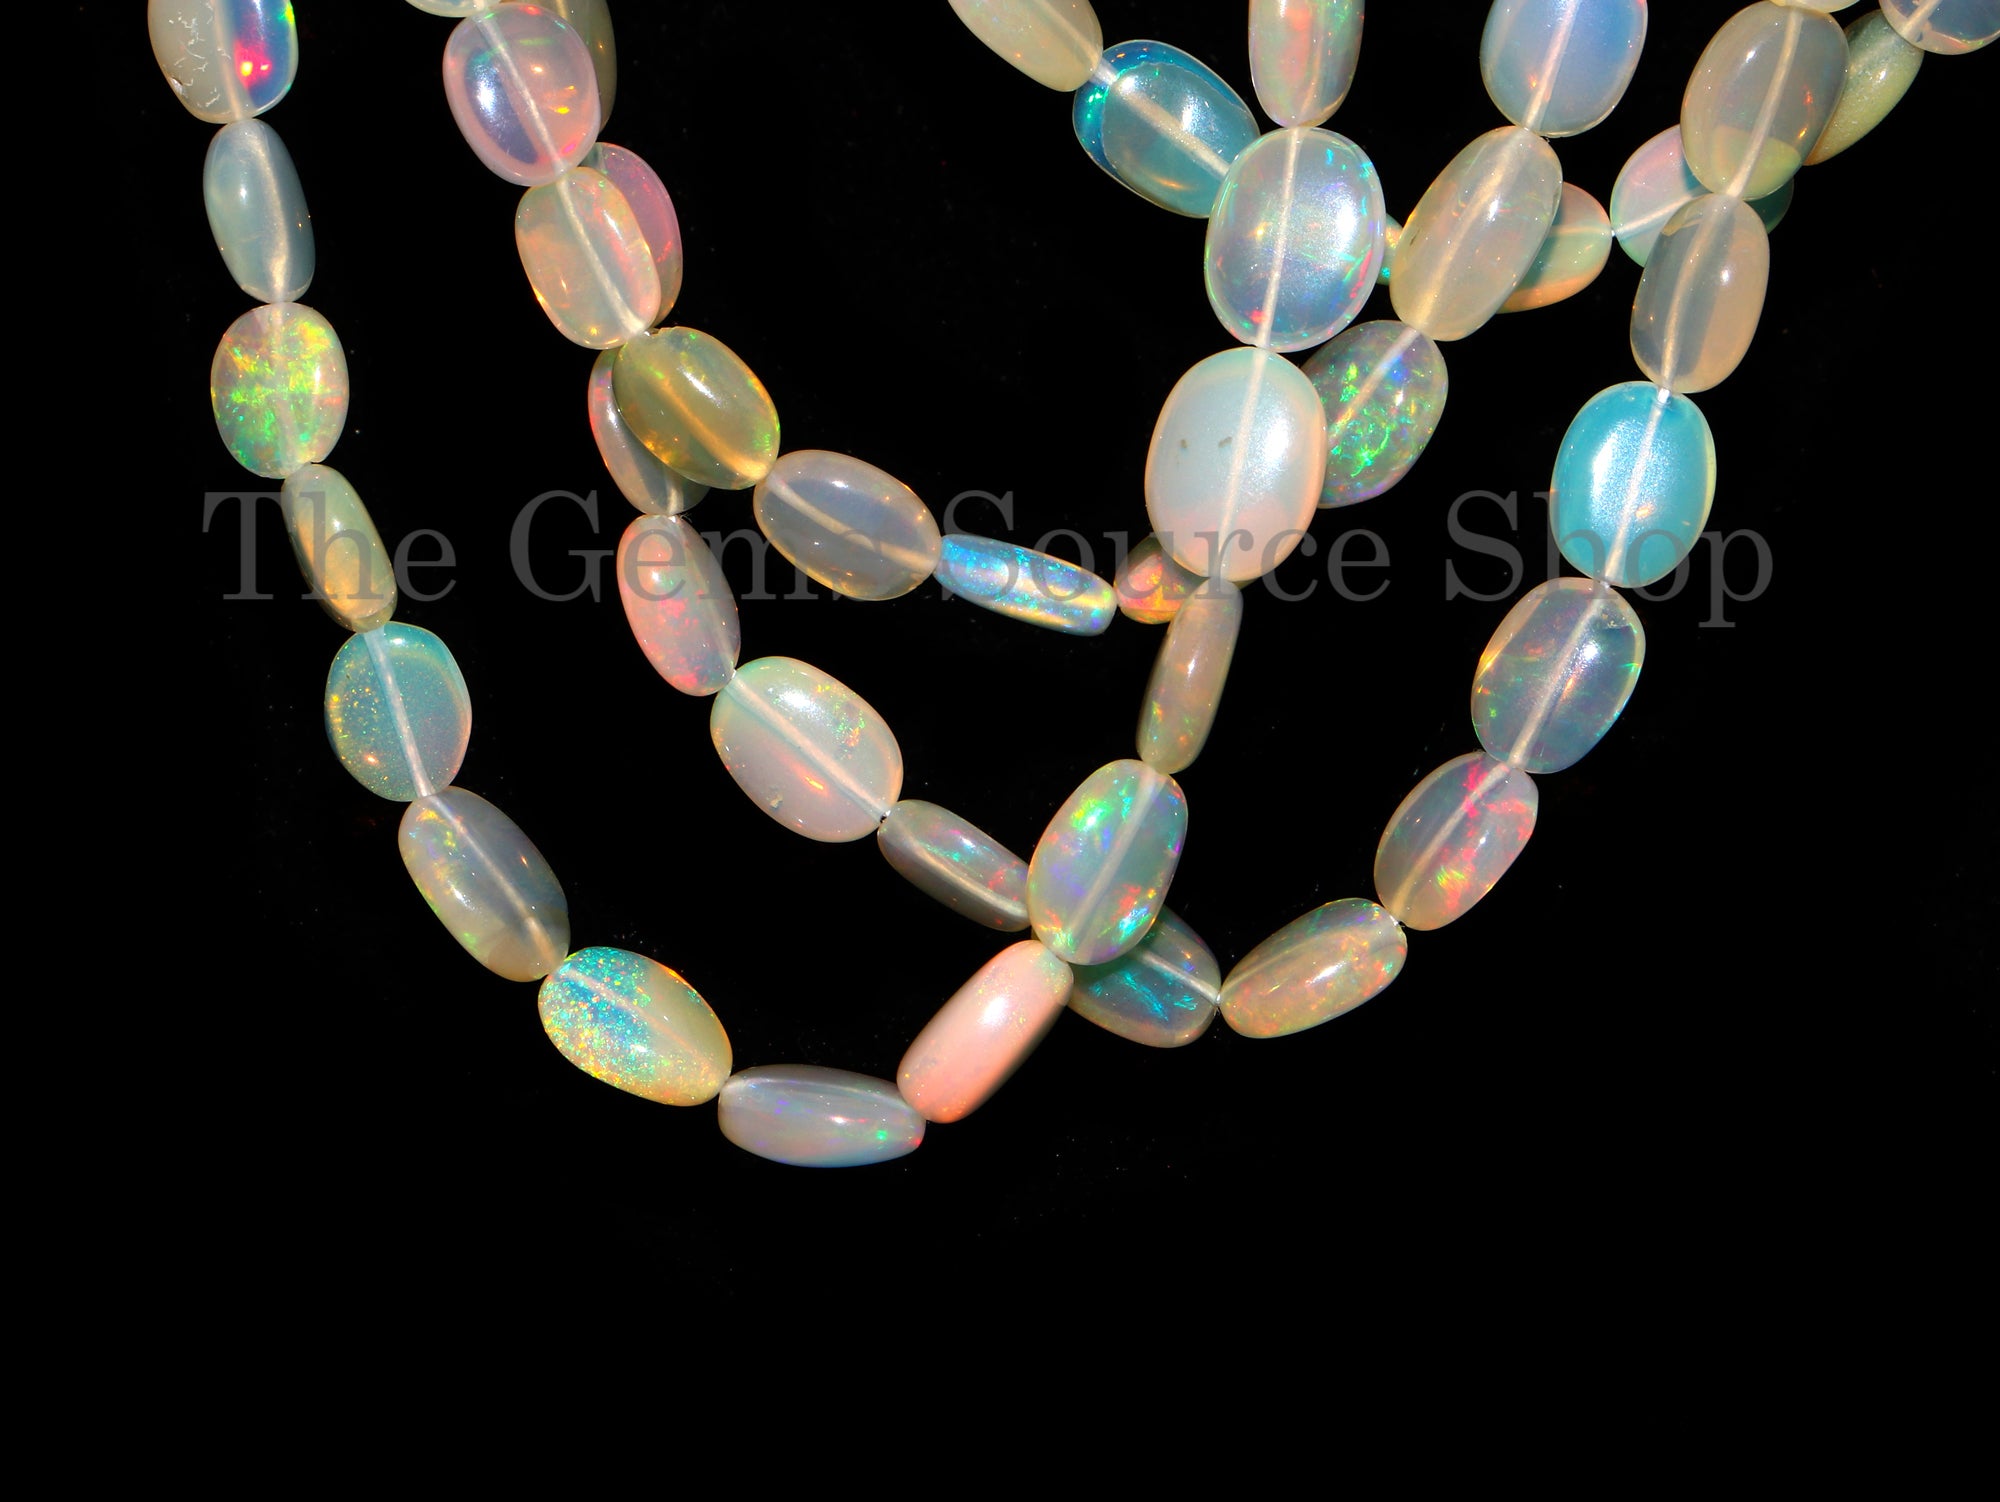 Ethiopian Opal Plain Oval Beads, Smooth Oval Briolette, Opal Beads Jewelry